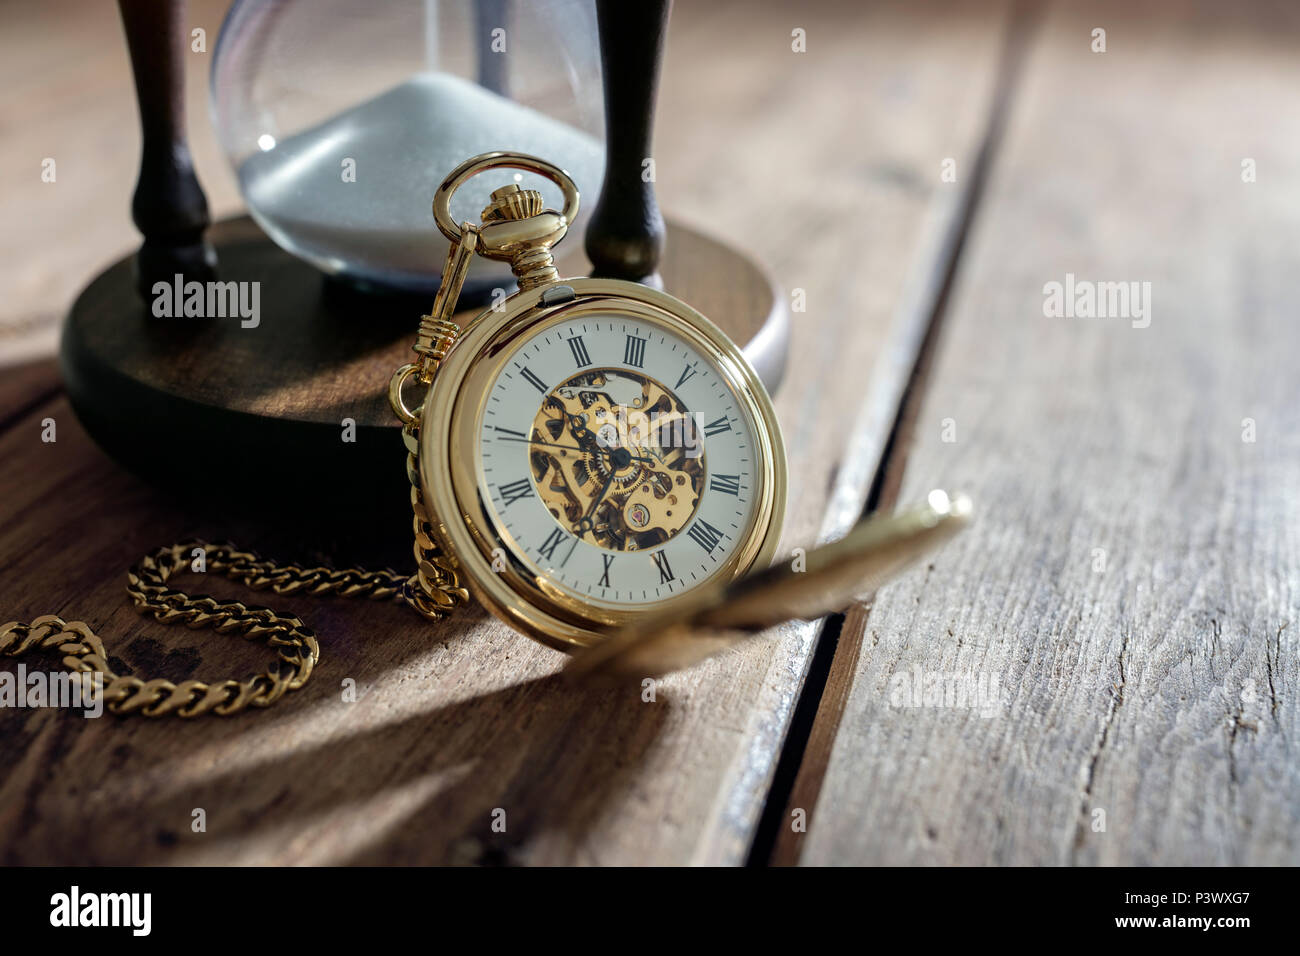 Vintage pocket watch and hour glass or sand timer, symbols of time with copy space Stock Photo